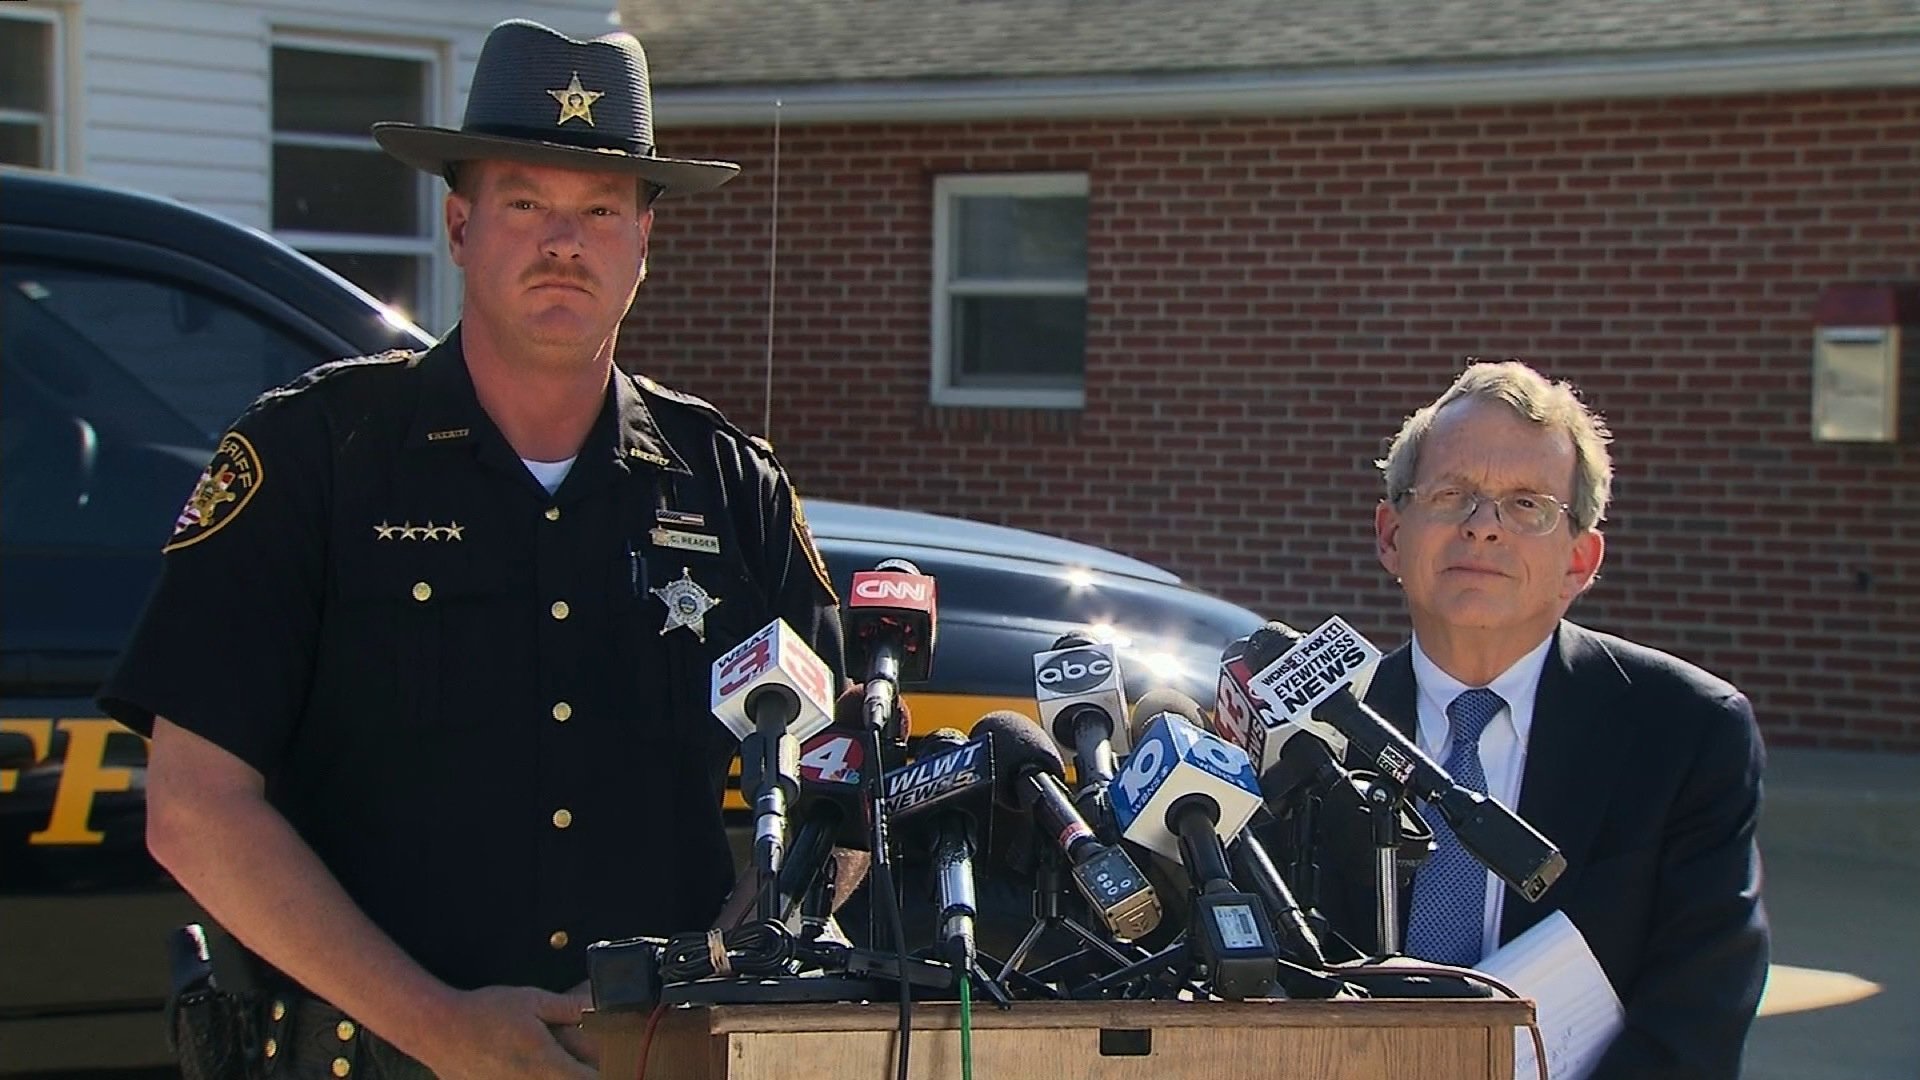 Investigators found three marijuana "grow operations" at residences where eight family members were slain in southern Ohio, state Attorney General Mike DeWine said Sunday at a news conference.